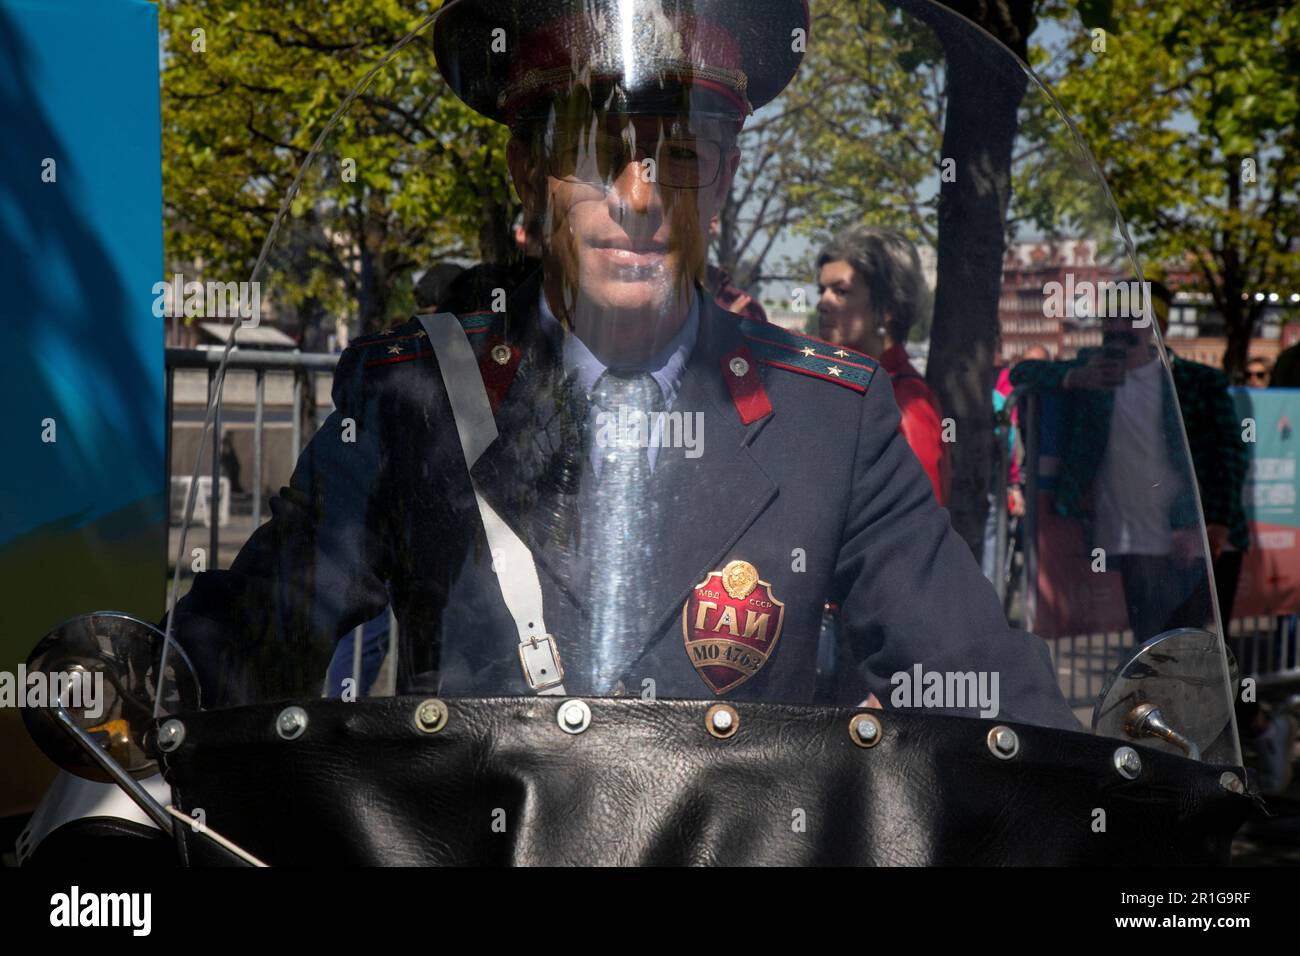 Moscow, Russia. 13th May, 2023. A man in a Soviet uniform of a traffic police officer sits behind the wheel of a Ural motorcycle at tthe Moscow Motorcycle Festival marking the opening of a new motorcycle season in the Muzeon Park of Moscow, Russia Stock Photo